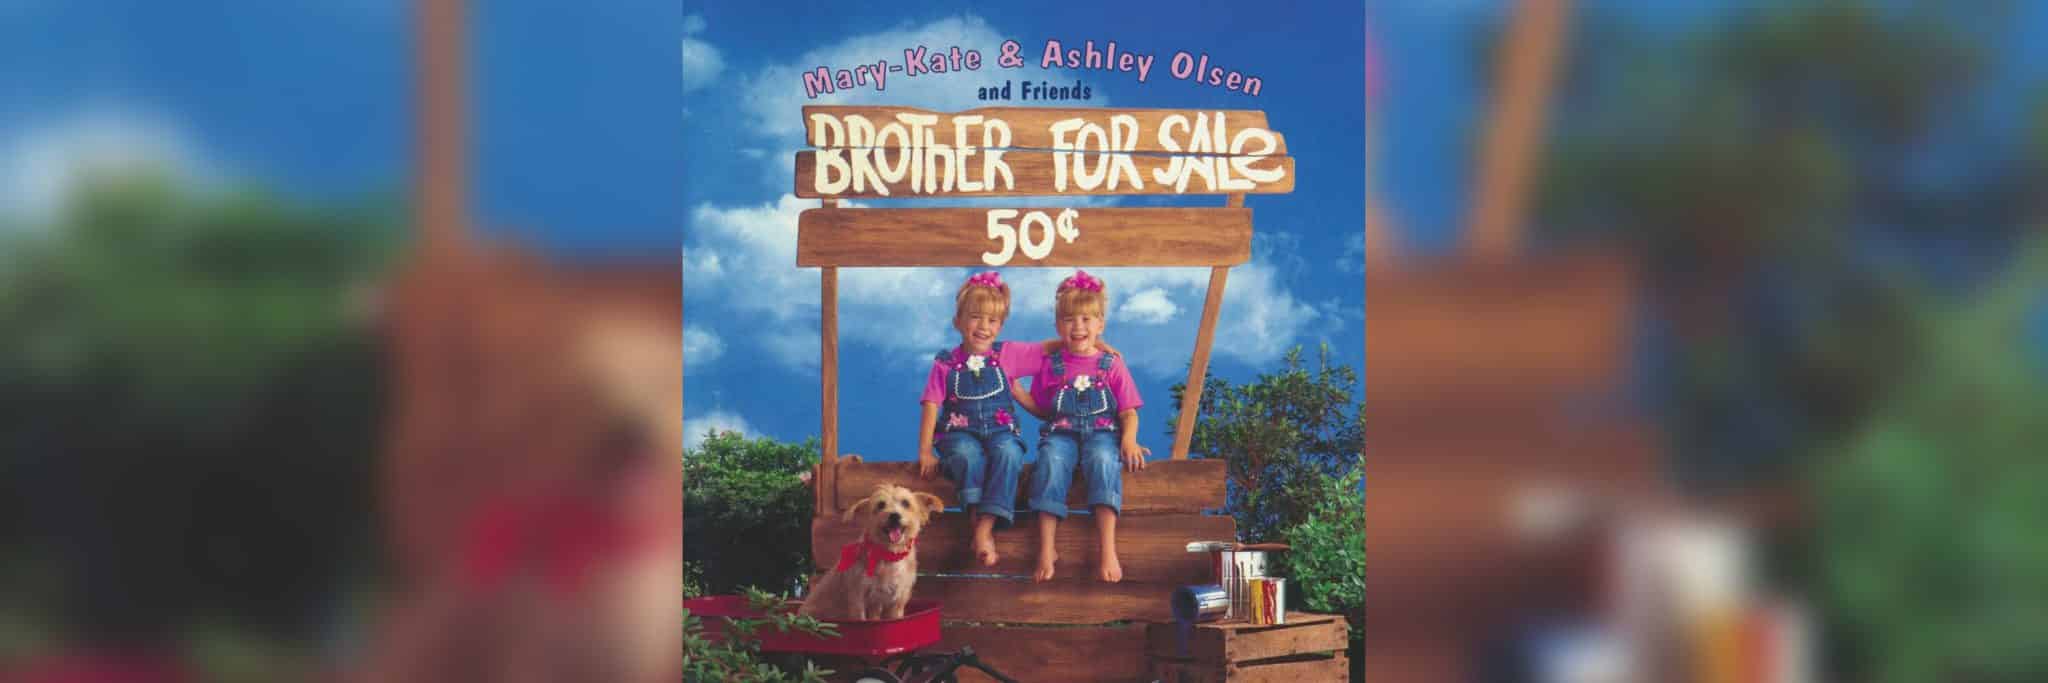 Album Cover of Olsen Twins’ Brother For Sale CD